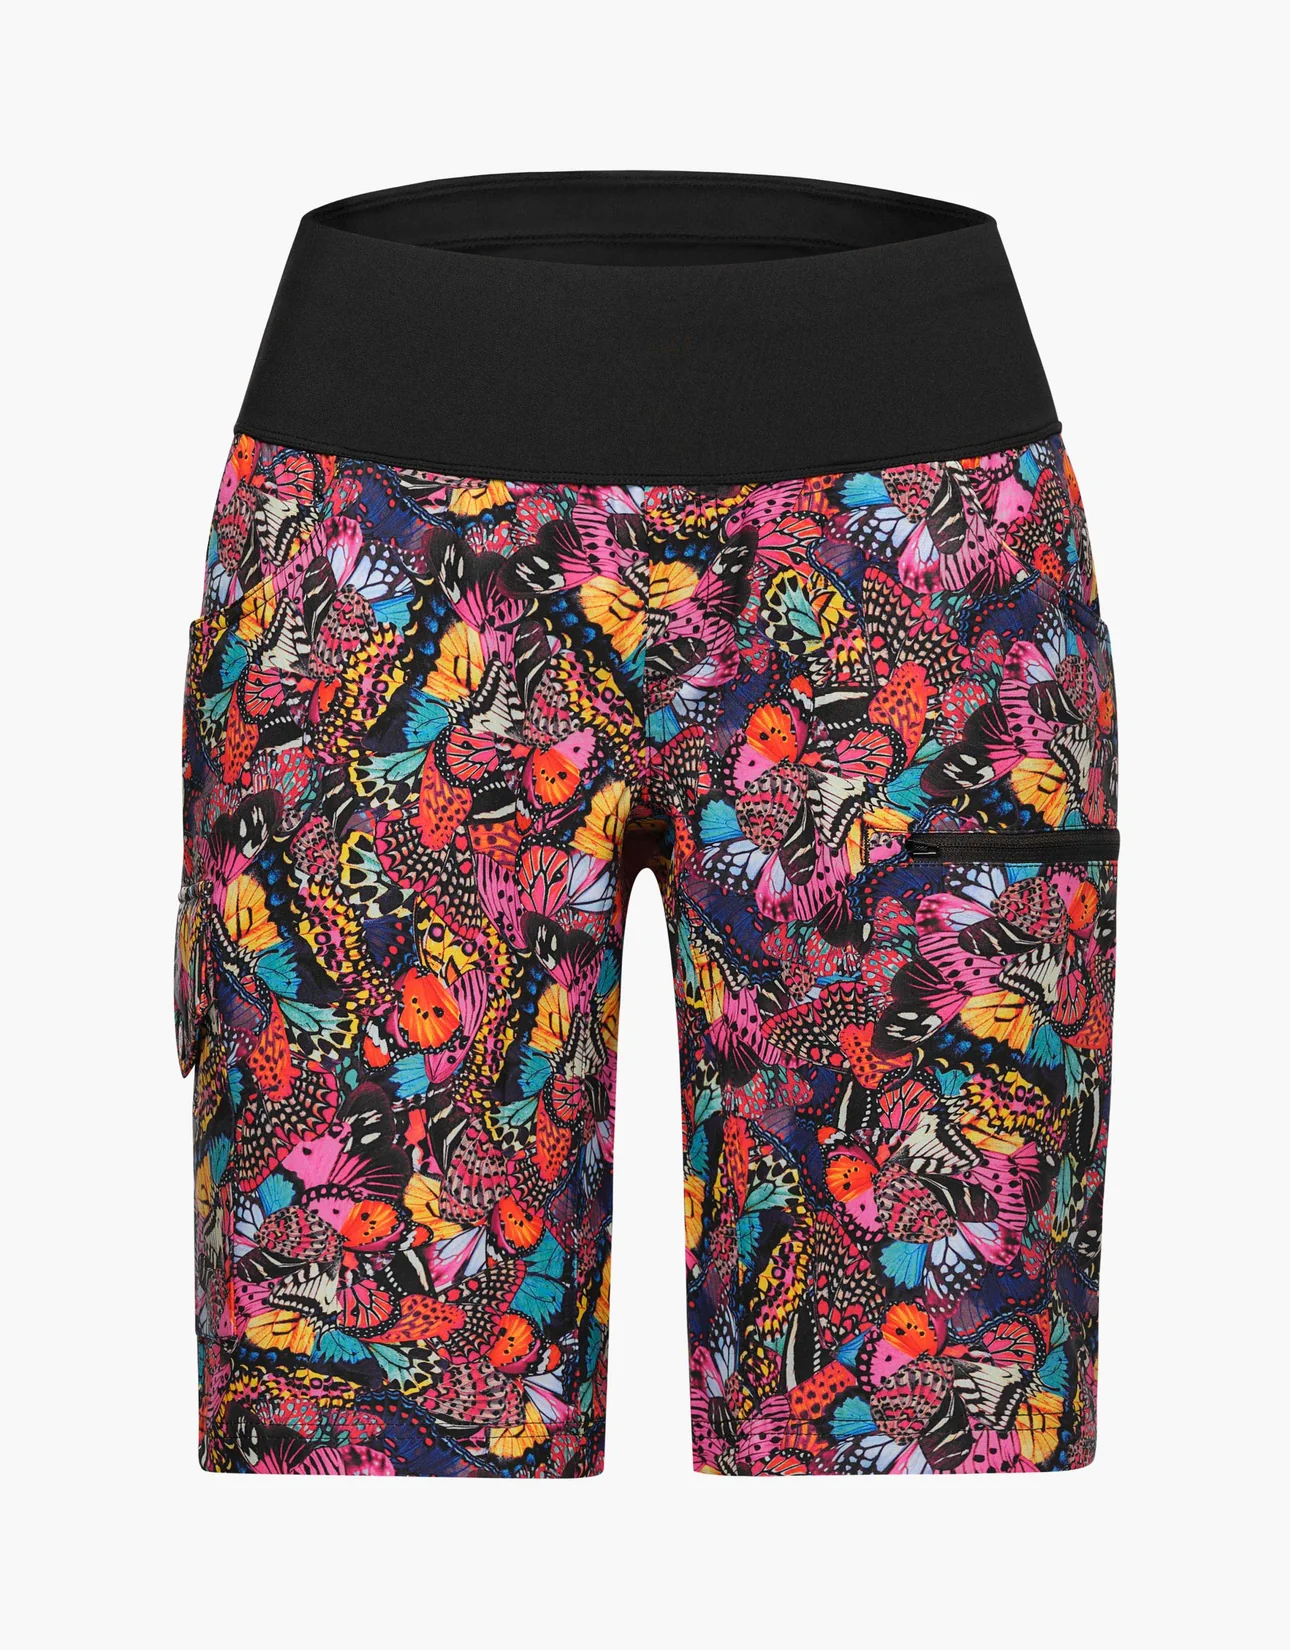 Kara Williard reviews the Shredly Limitless 11'' Stretch Waistband High-Rise Short for BLISTER.